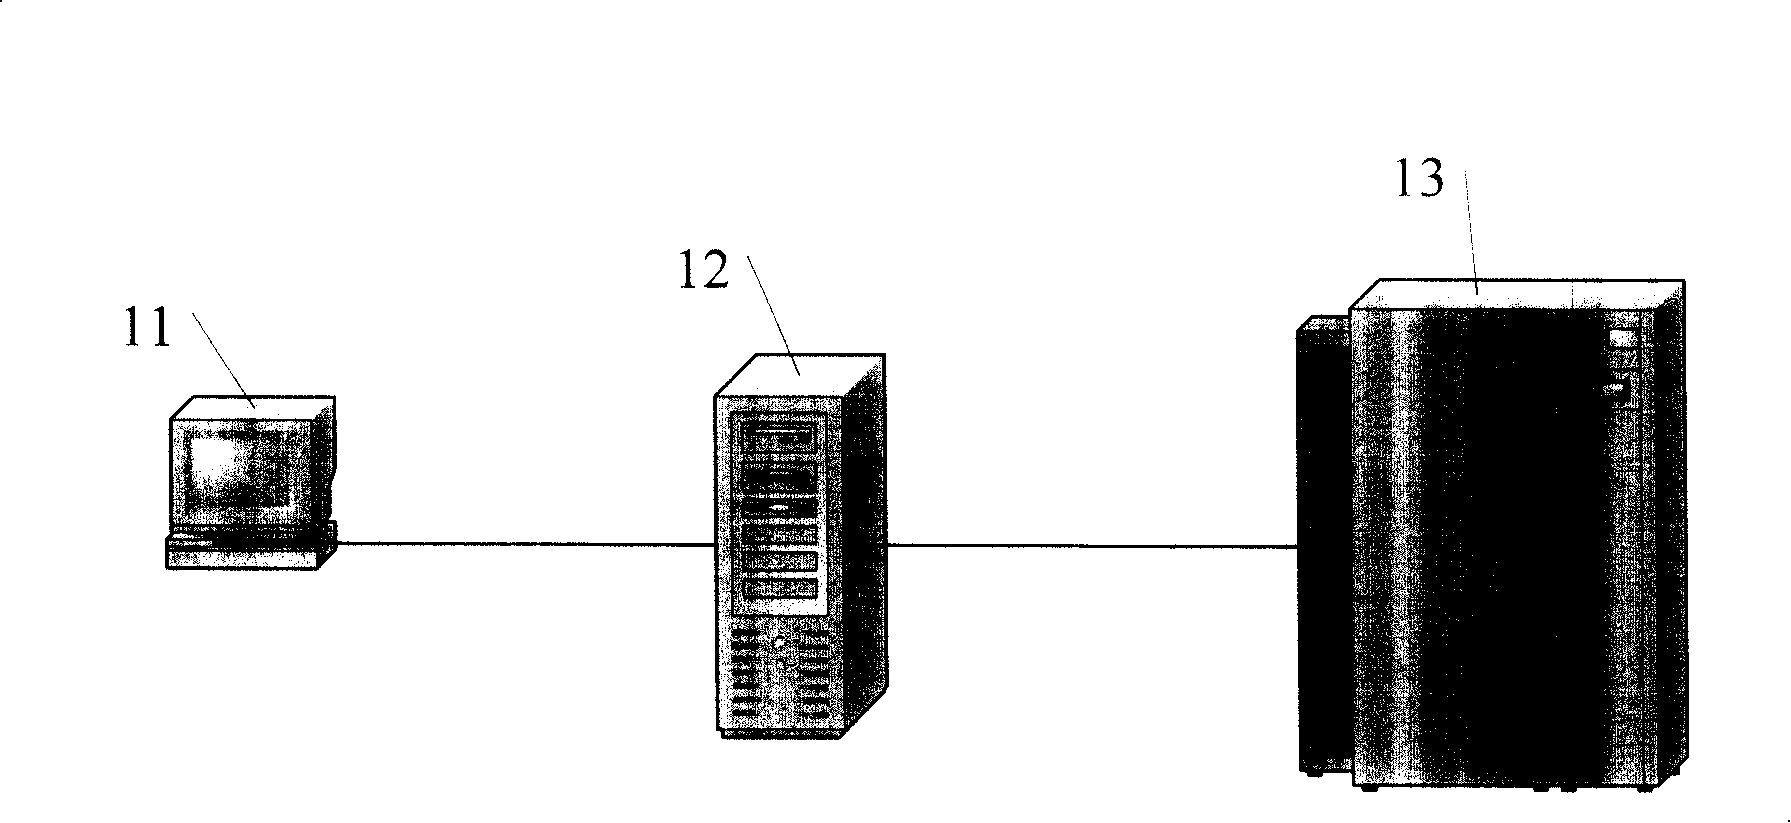 Electronic payment failure testing method, device and electronic payment system